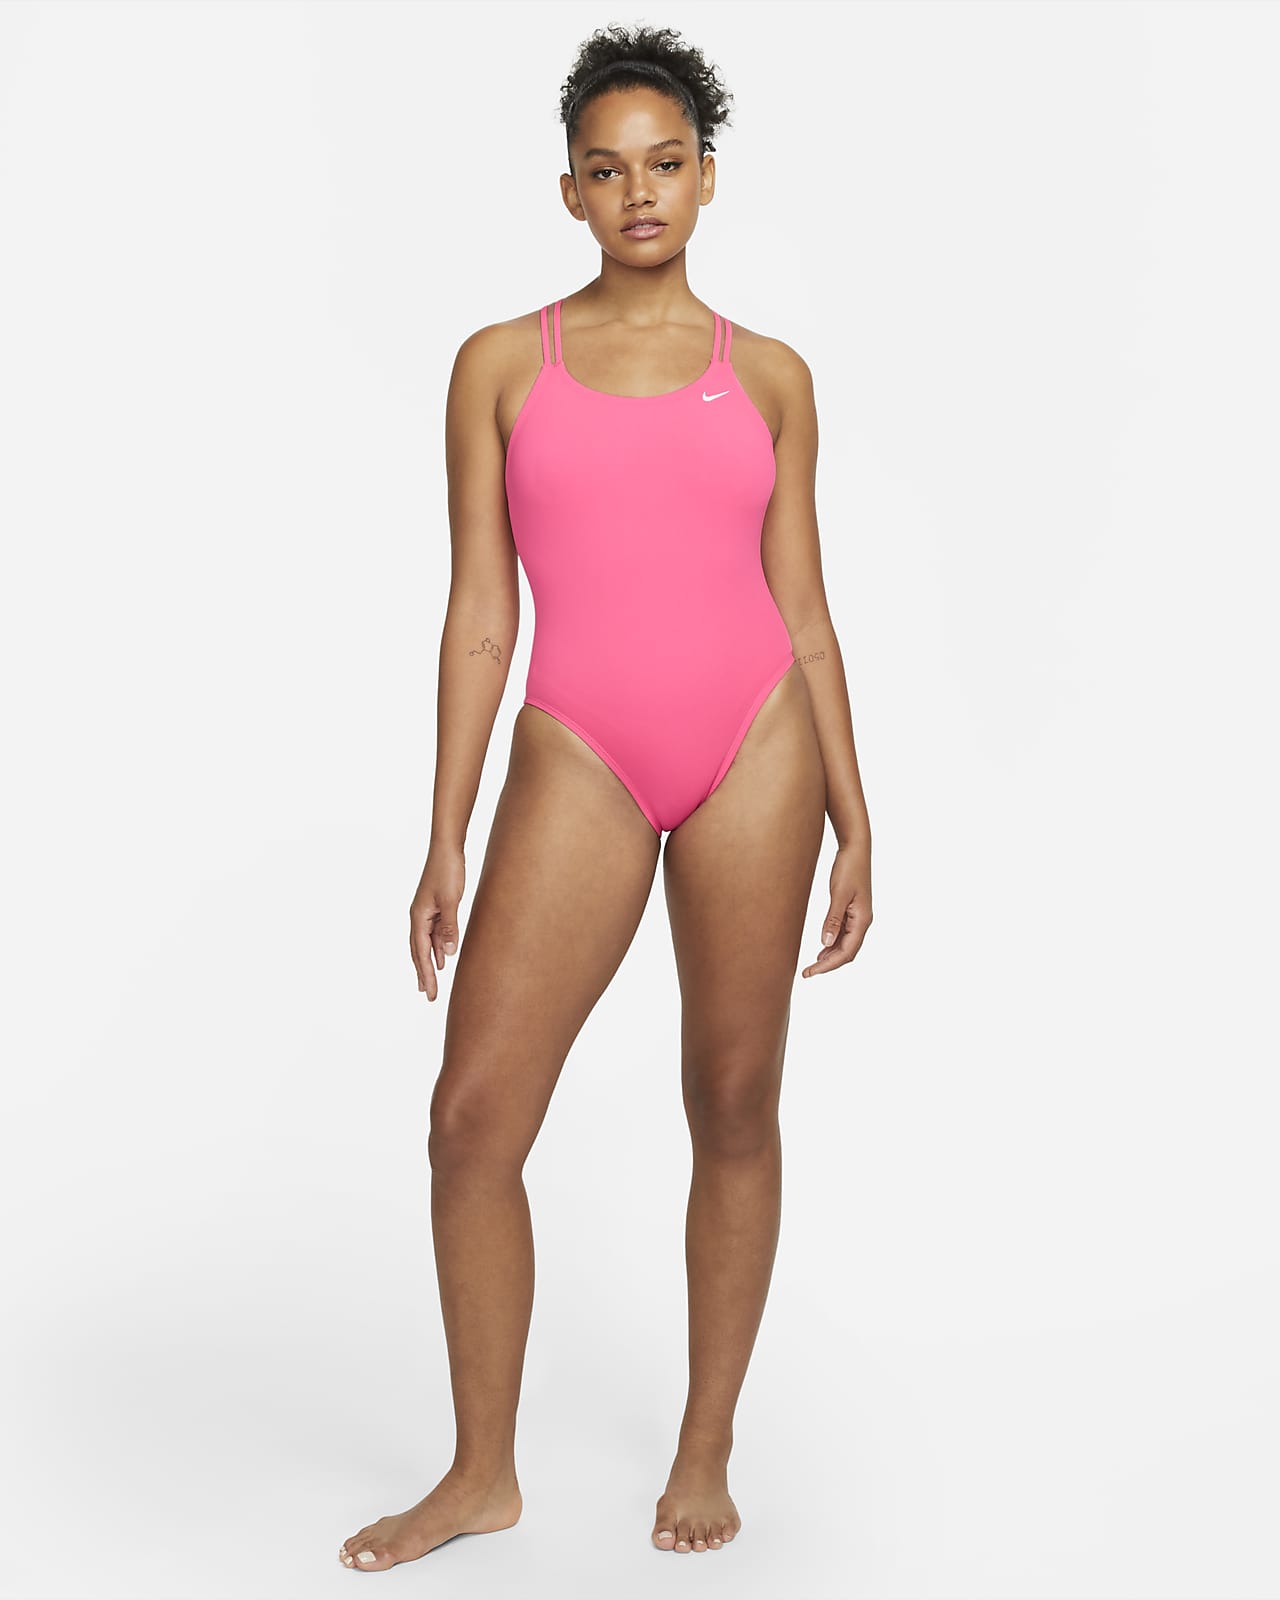 nike pink one piece swimsuit